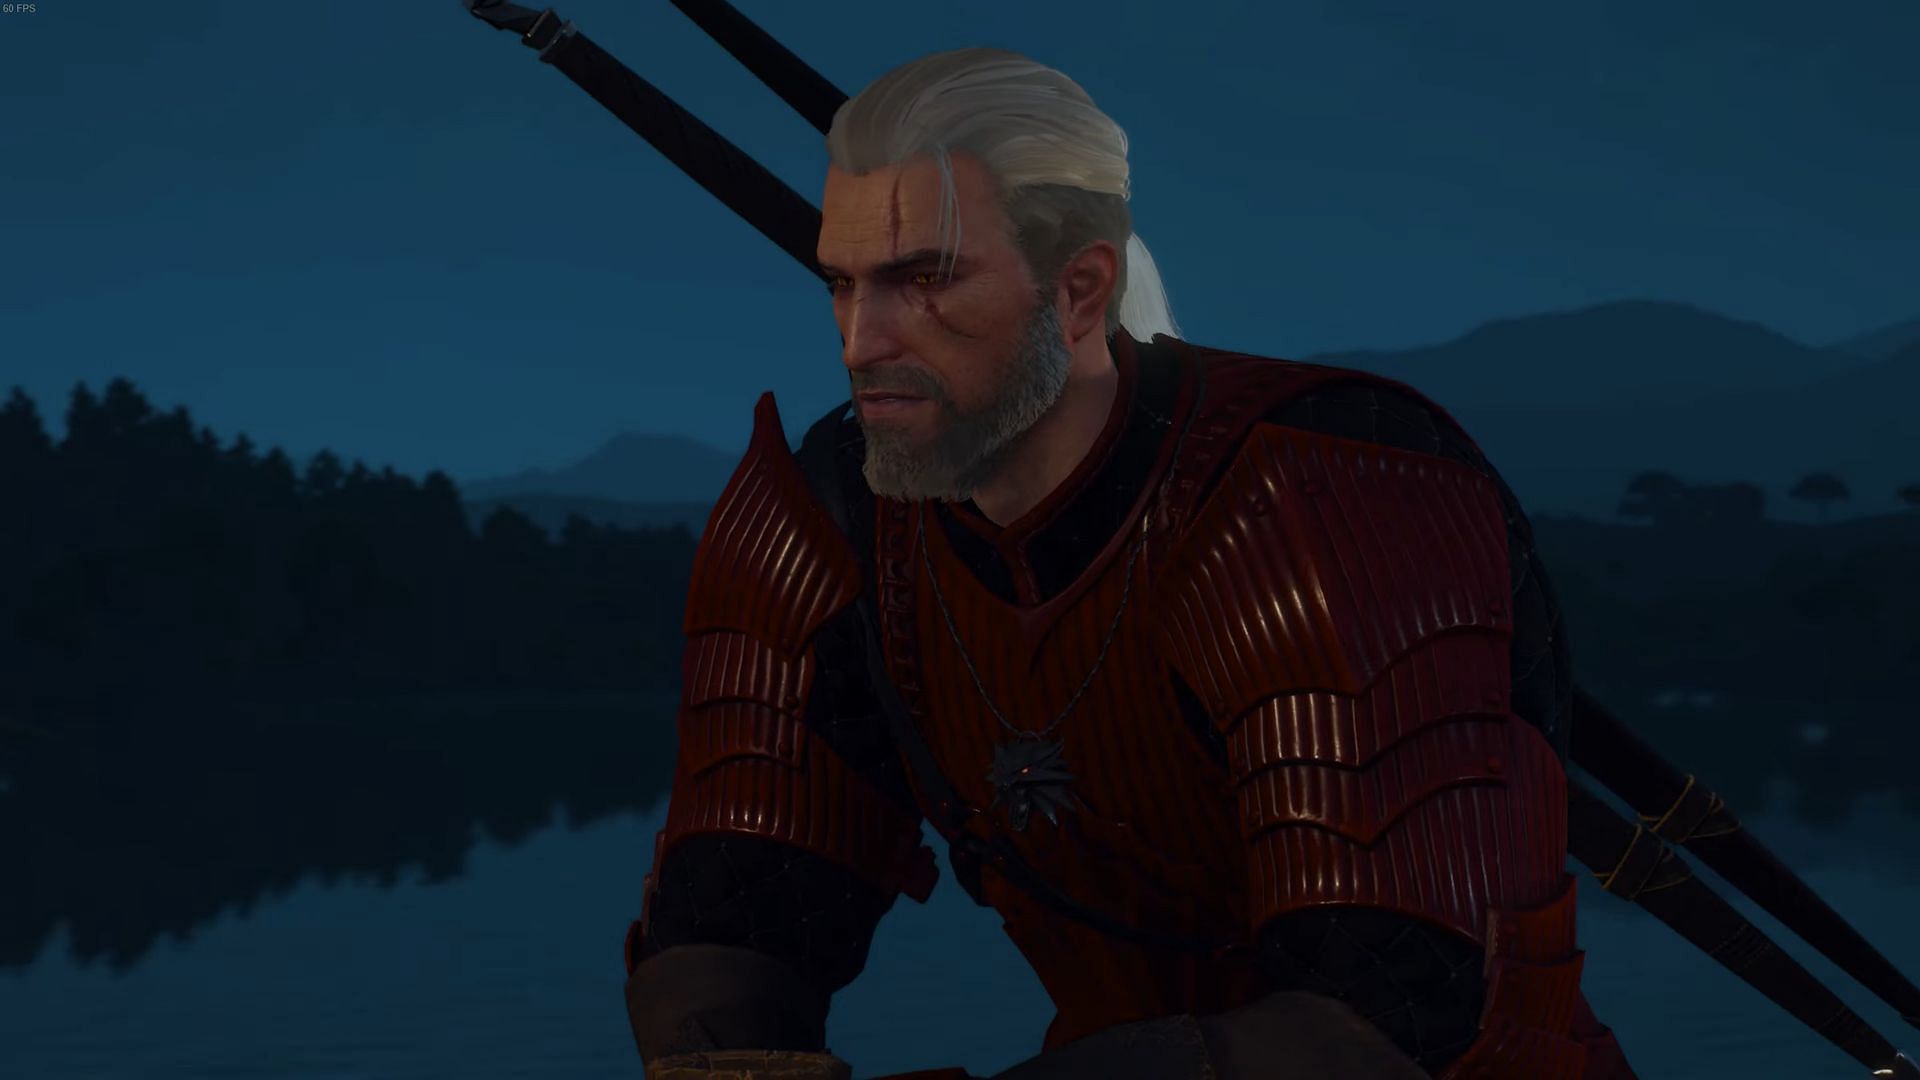 Hen Gaidth Armor set is one of the best armor sets in The Witcher 3 (Image via CD Projekt Red || plaiimade on YouTube)